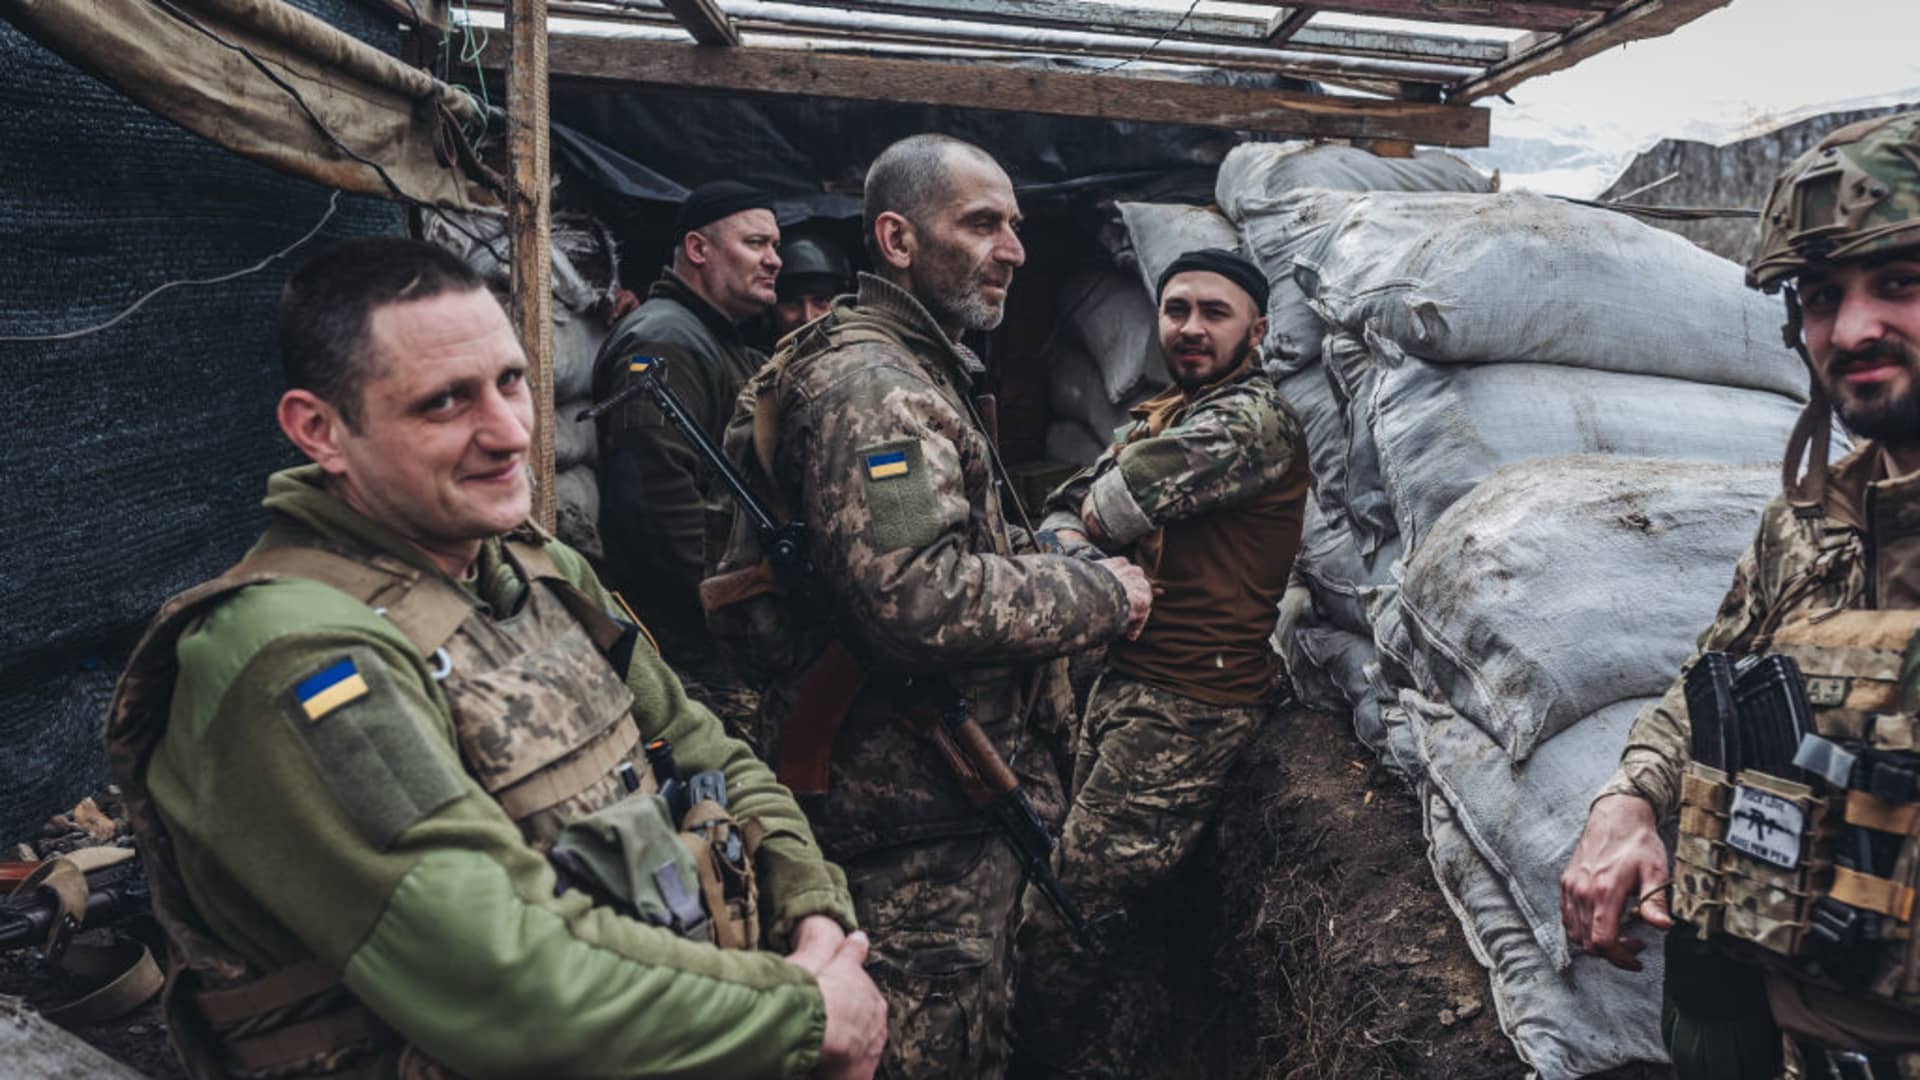 Ukrainian soldiers talk to each other at a Ukrainian frontline in Donbass, Ukraine on April 11, 2022. 